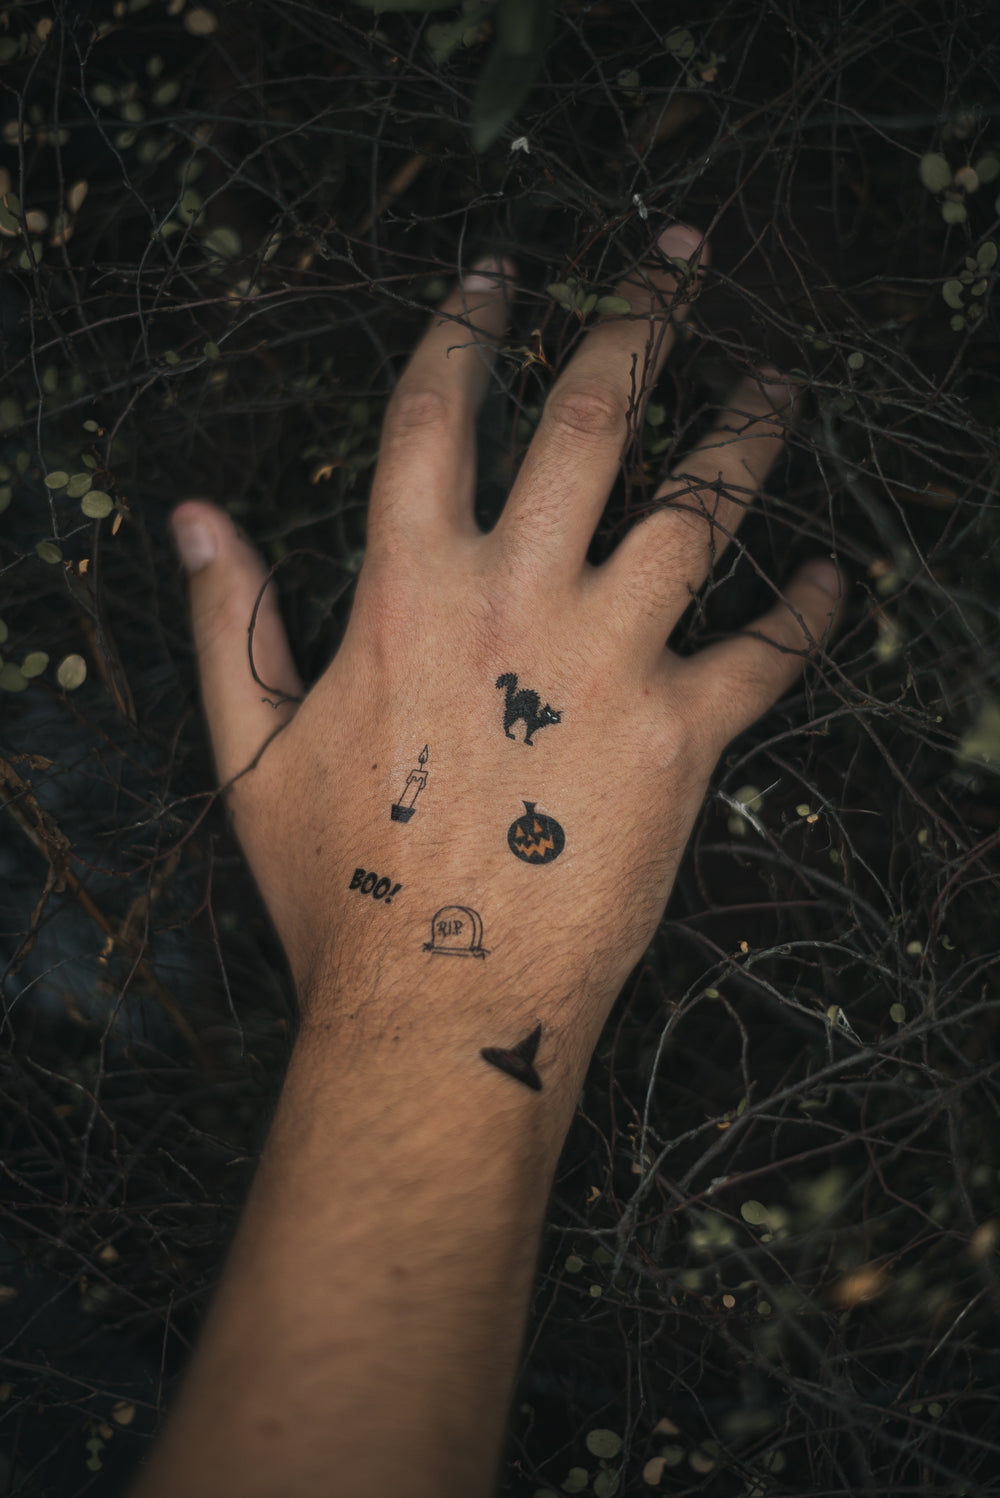 58 Inspiring Mental Health Tattoos With Meaning - Our Mindful Life